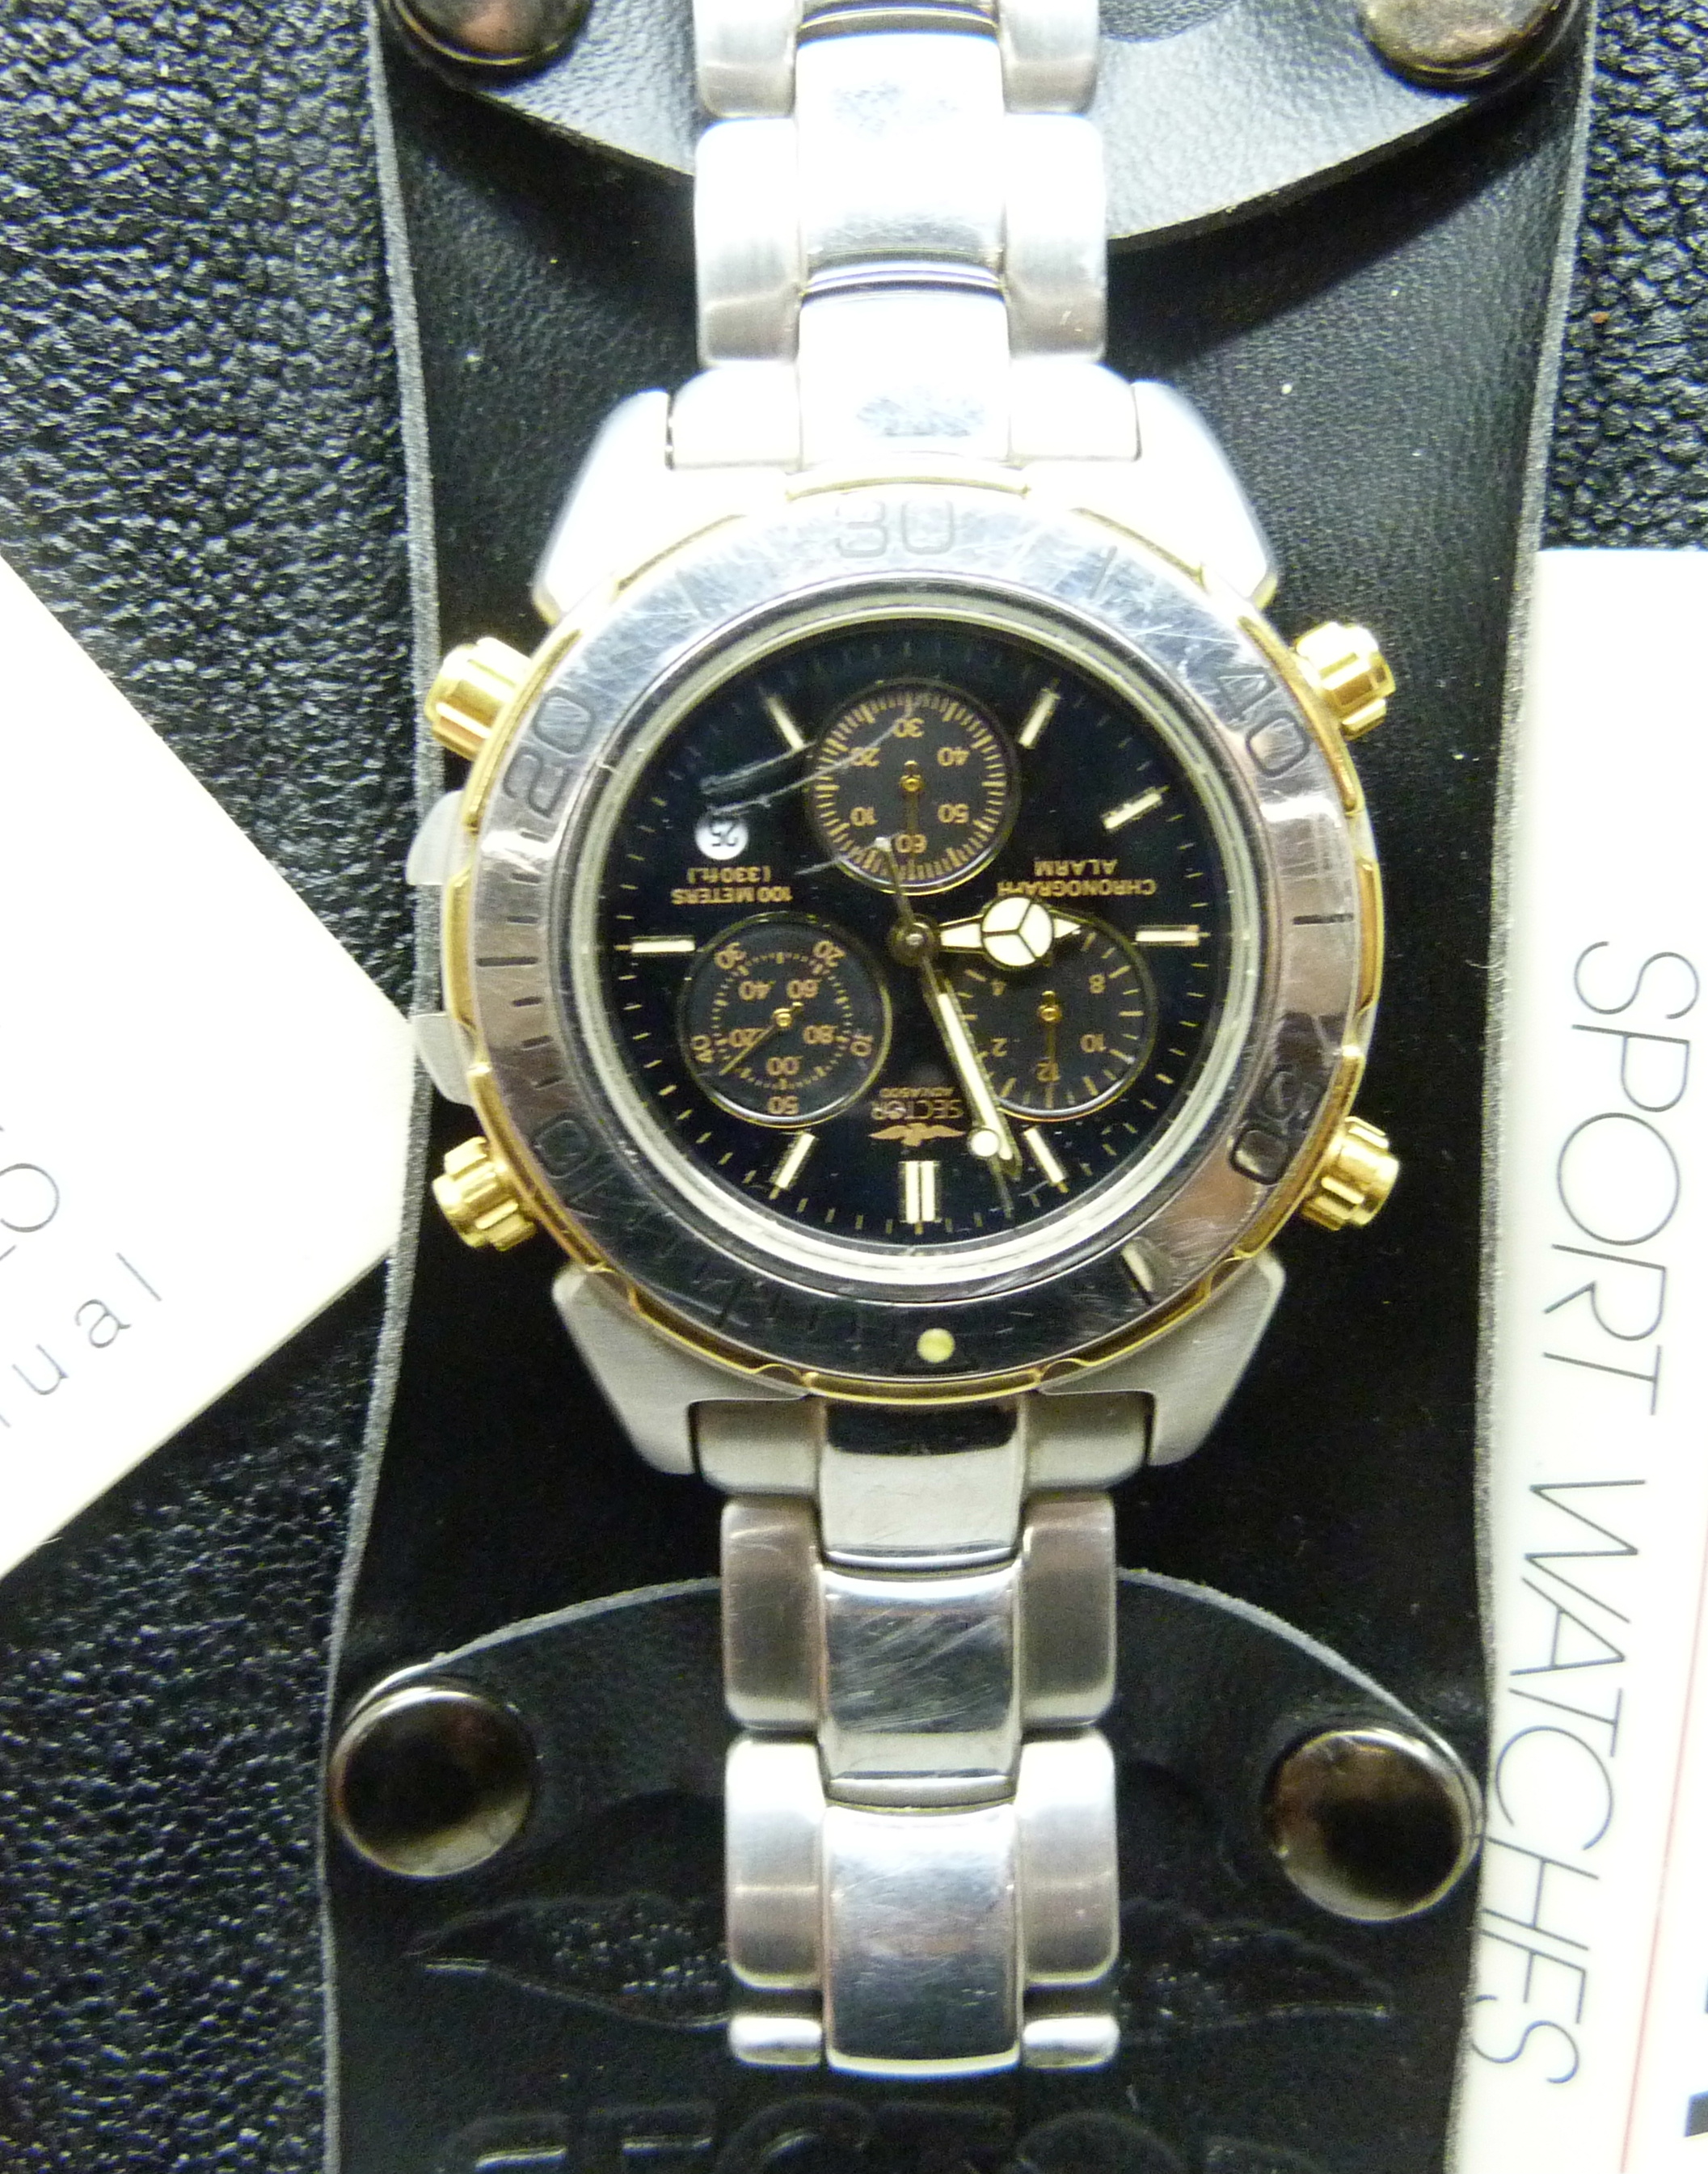 A Sector chronograph alarm wristwatch in soft pouch, with card and instructions - Image 3 of 3